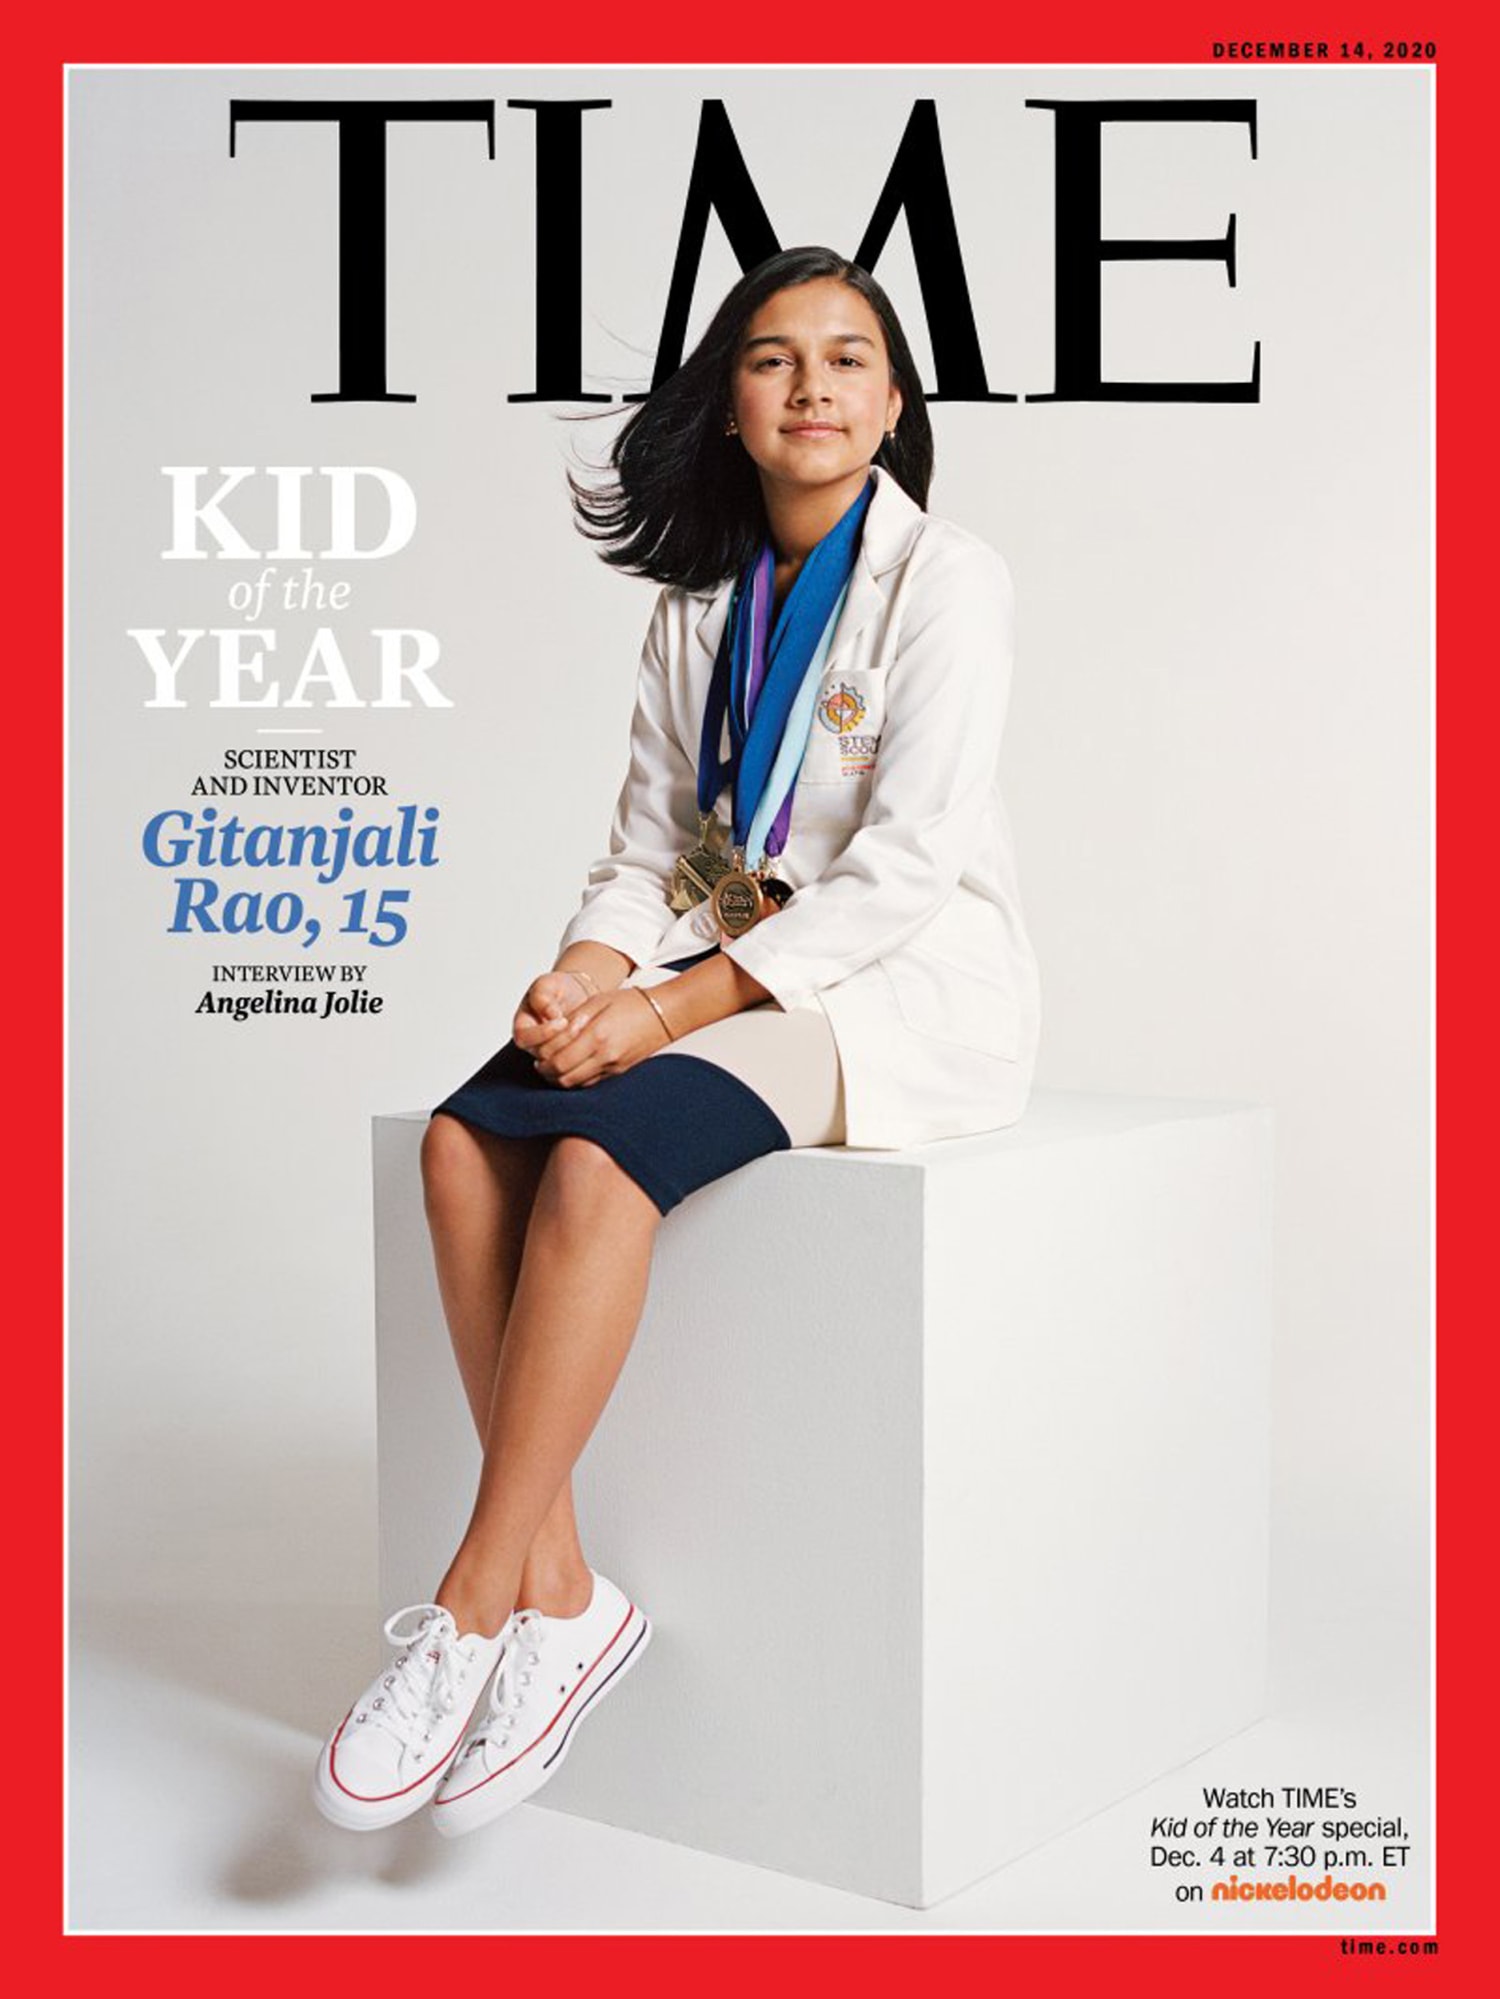 student scientist and inventor gitanjali rao is time magazine's first 'kid of the year'